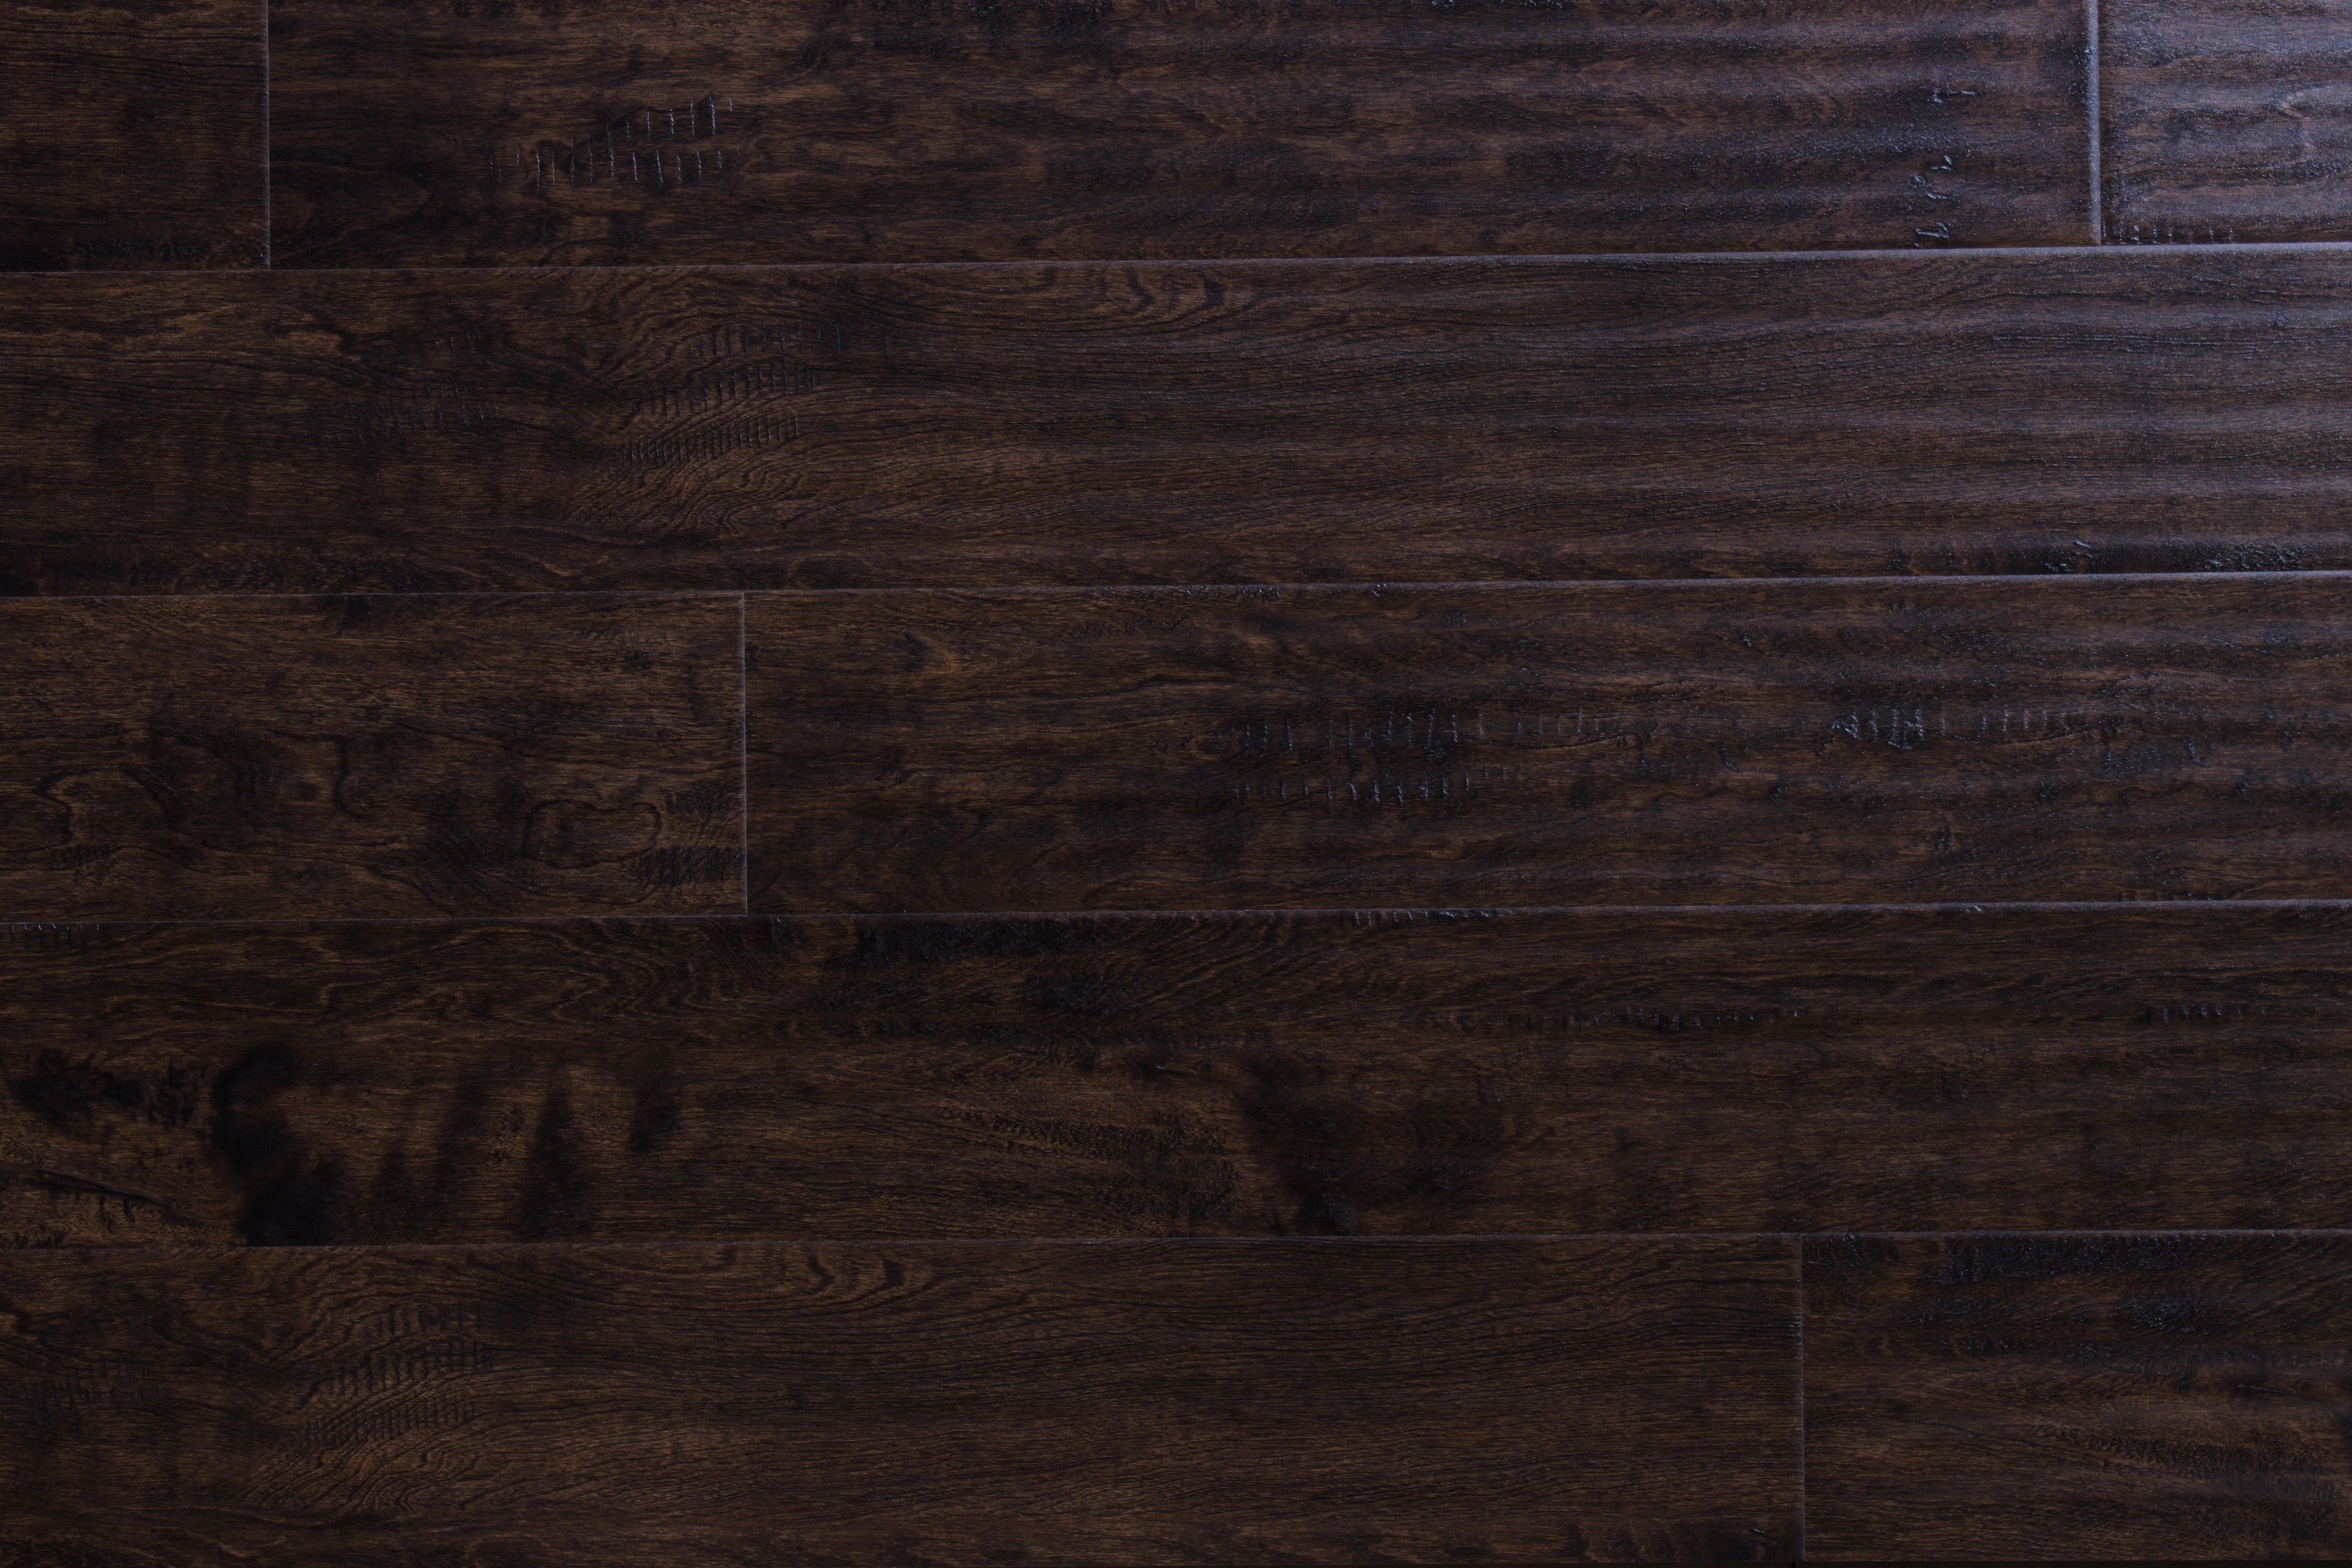 15 Stylish 4 Inch Wide Hardwood Flooring 2024 free download 4 inch wide hardwood flooring of wood flooring free samples available at builddirecta pertaining to tailor multi gb 5874277bb8d3c